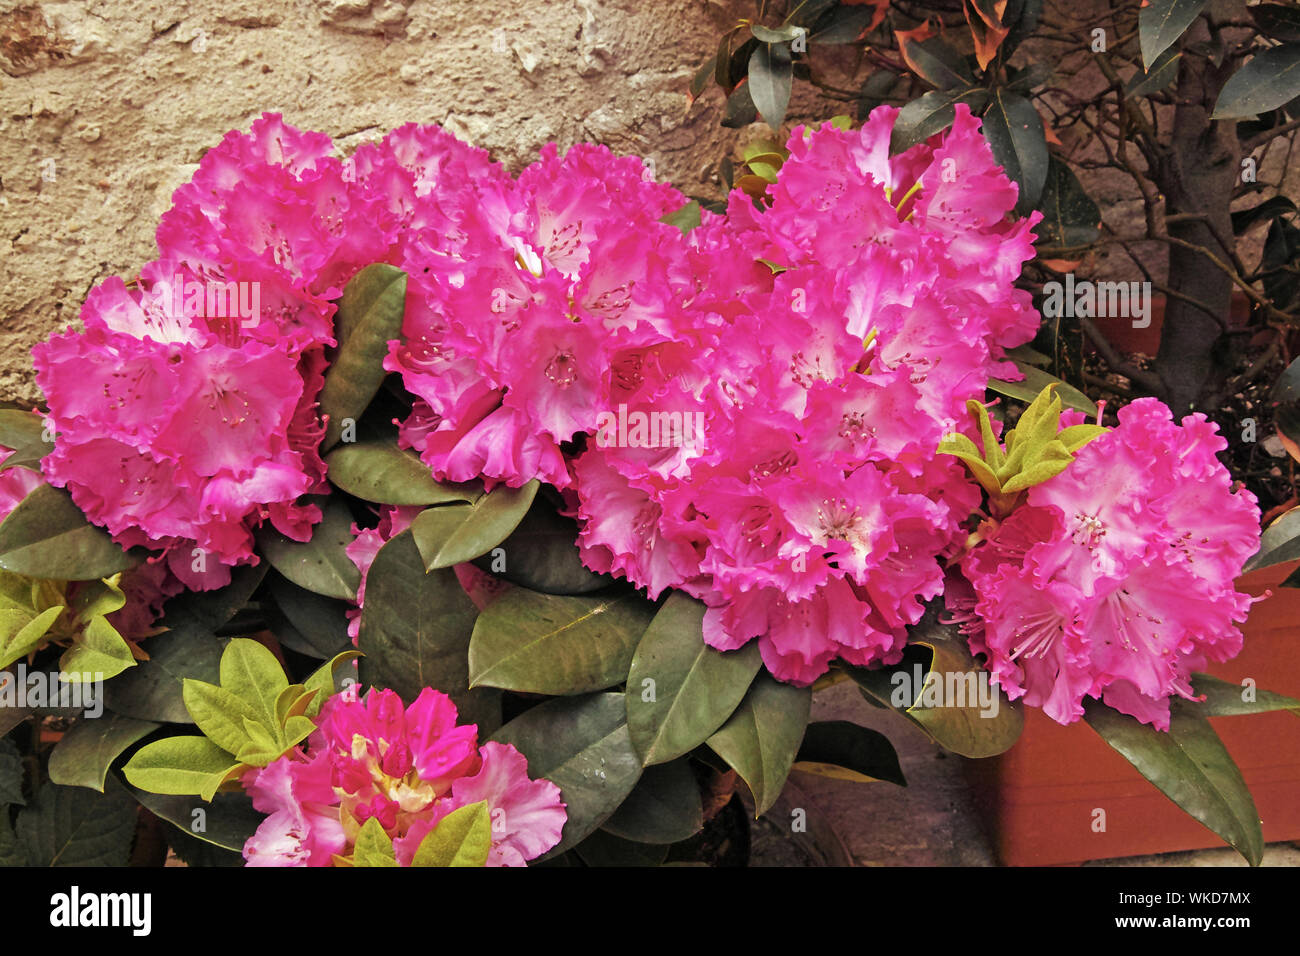 blooming plant of rhododendron Stock Photo